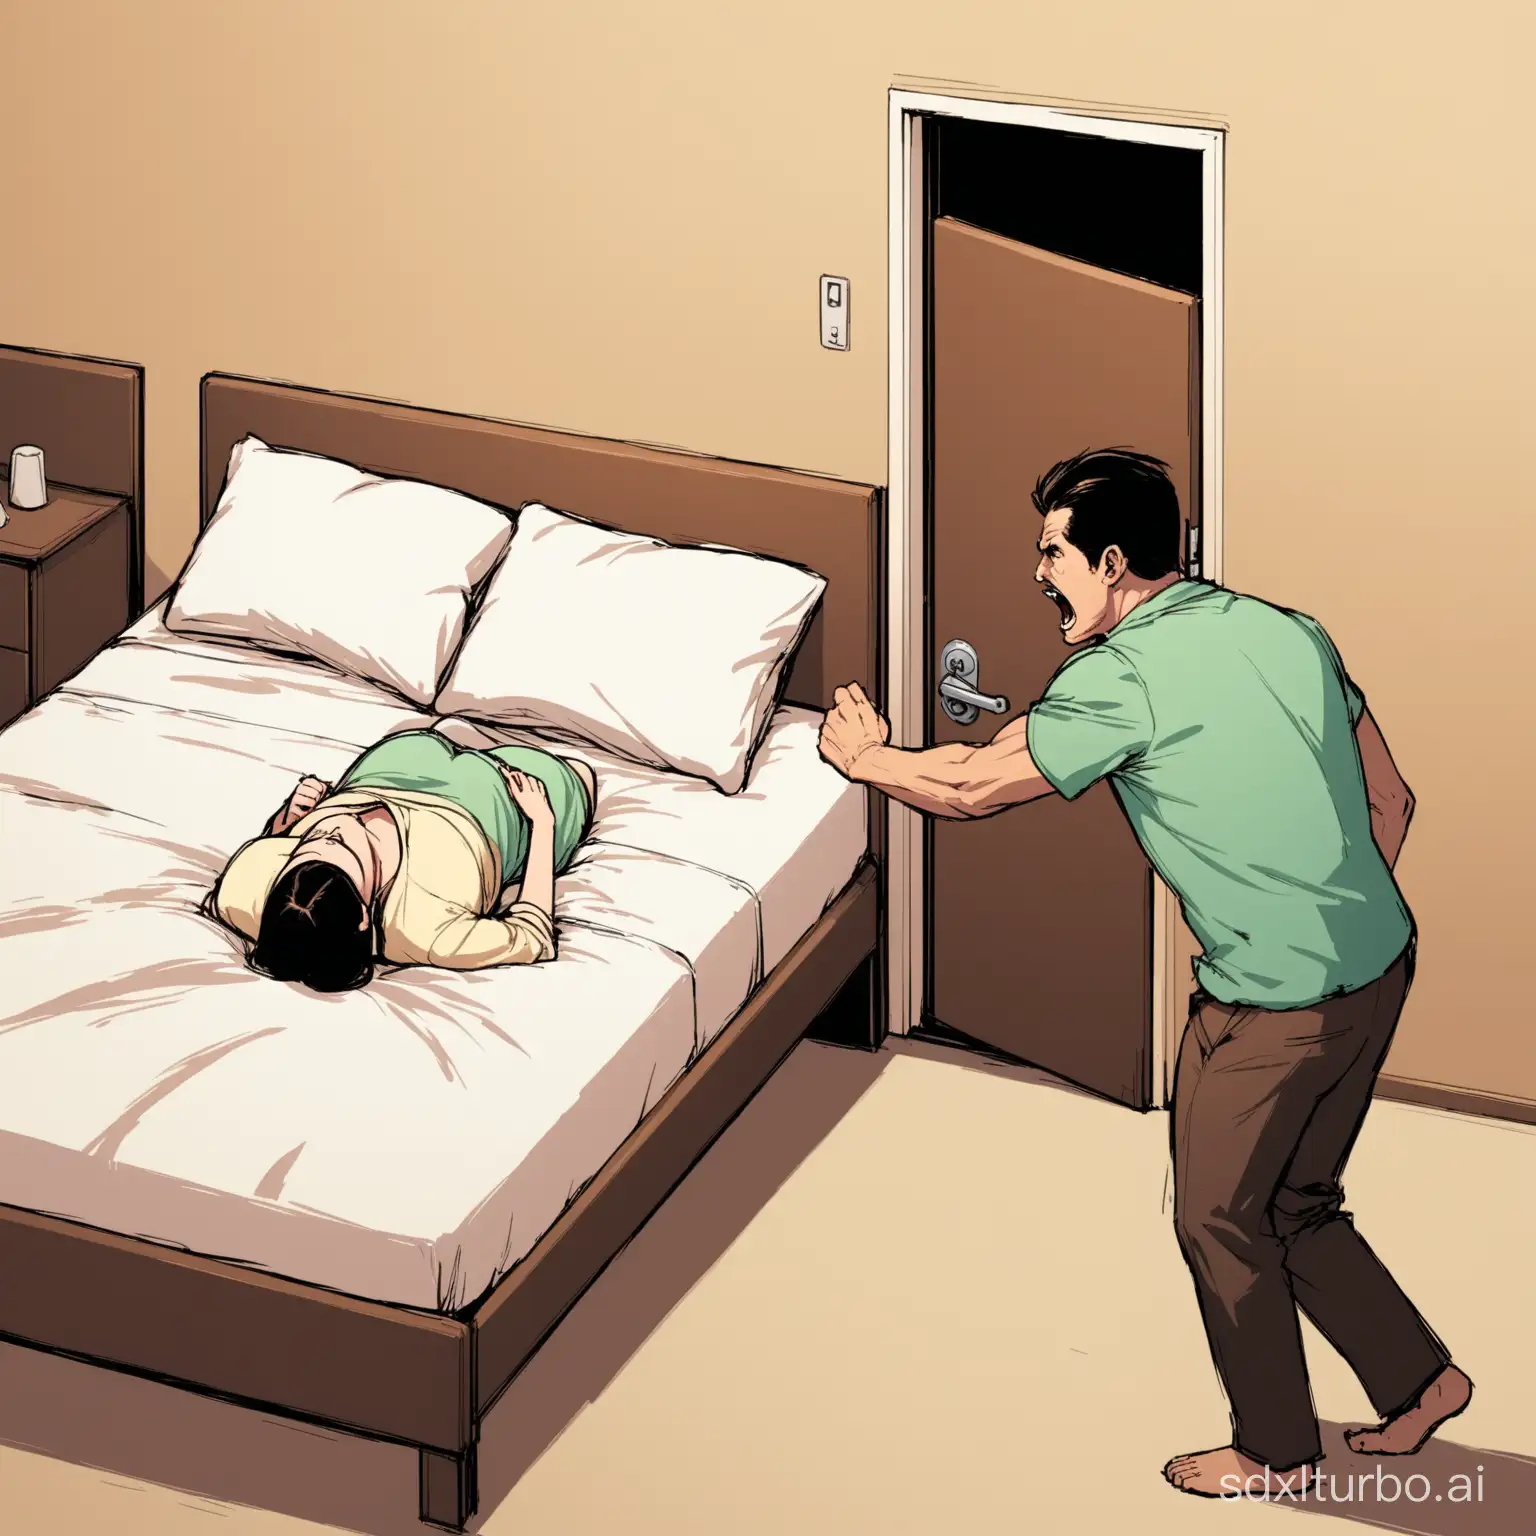 A man pushes open the door and sees his wife and another man lying in bed together, angrily confronting them.